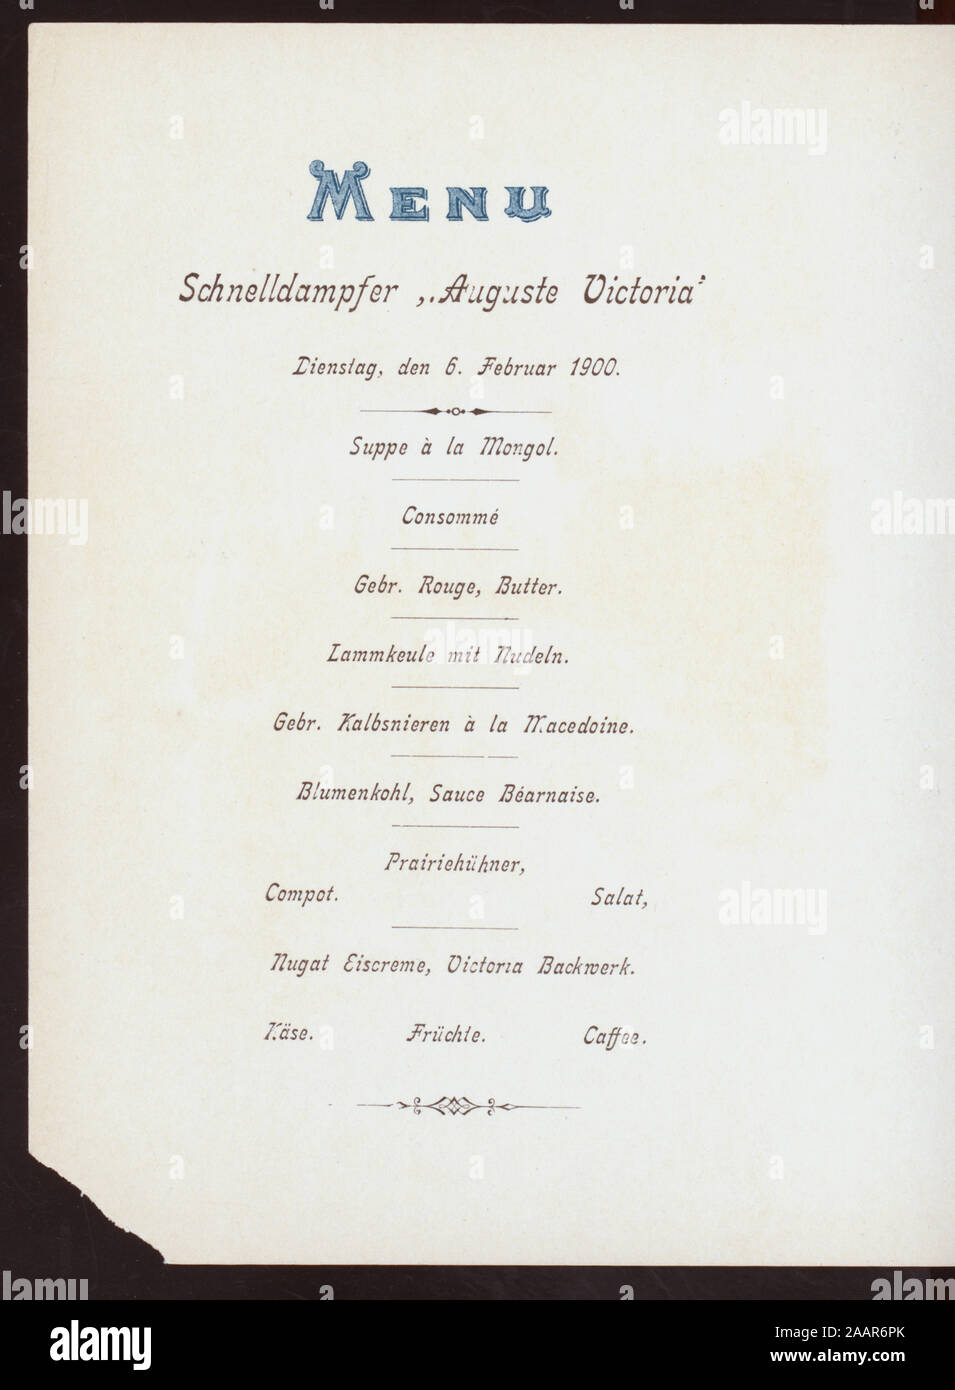 DINNER (held by) HAMBURG AMERIKA LINIE (at) SCHNELLDAMFERS AUGUSTE VICTORIA (SS;) ILLUS, ALGIERS IN BACKGROUND; SAILING SHIPS IN FOREGROUND; CONCERT PROGRAMM LISTED;; DINNER [held by] HAMBURG AMERIKA LINIE [at] SCHNELLDAMFERS AUGUSTE VICTORIA (SS;) Stock Photo